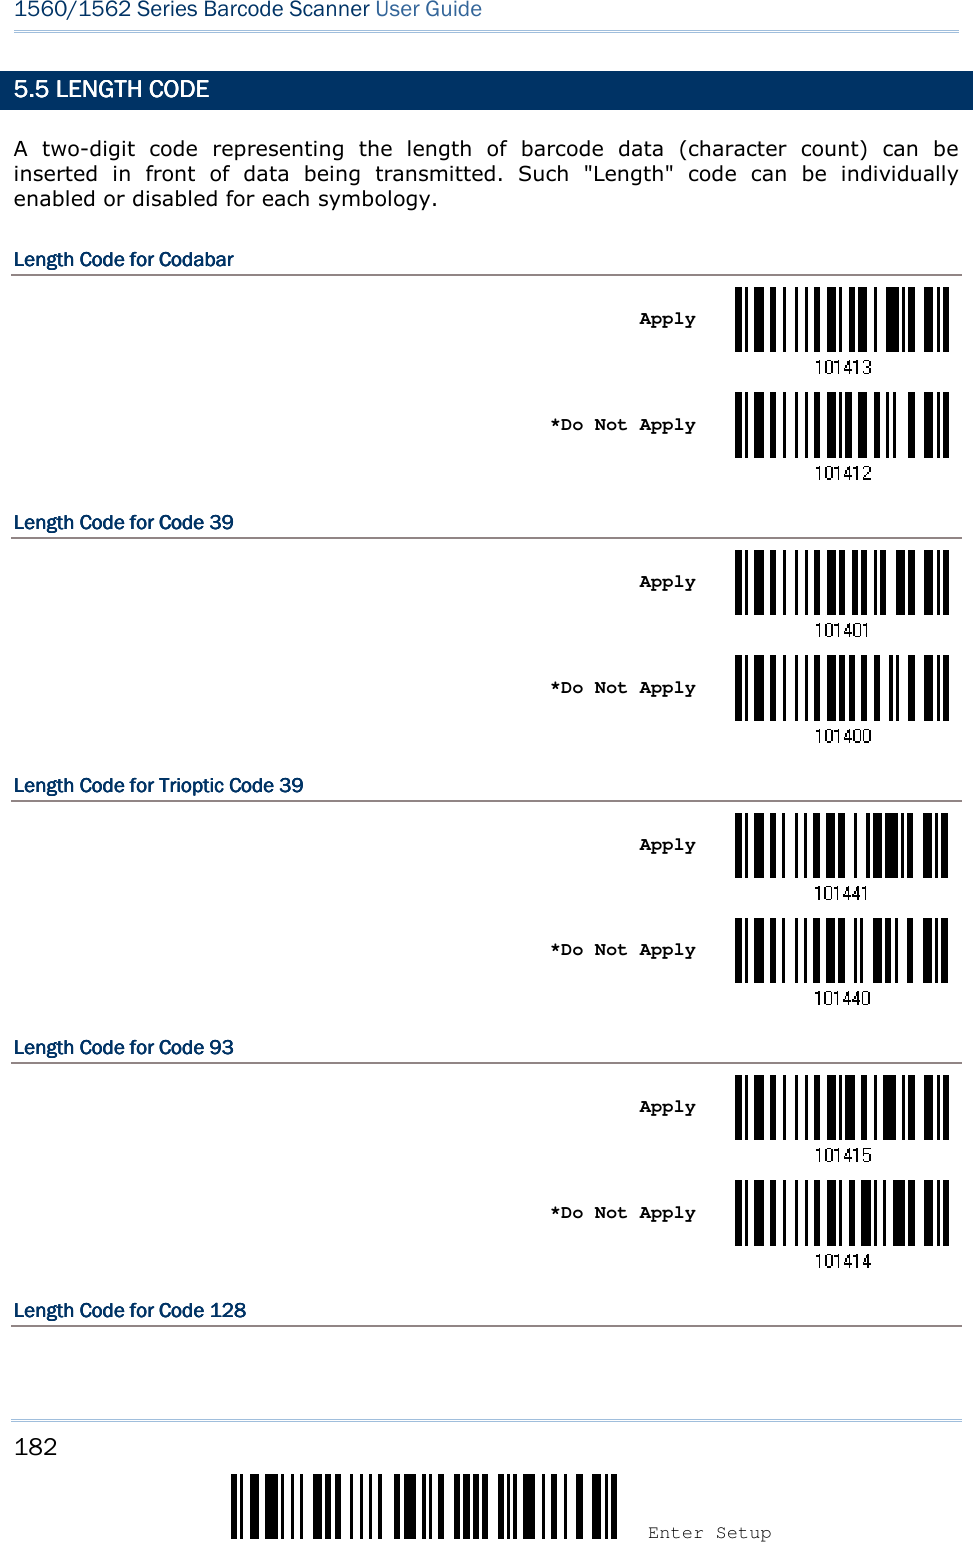 182 Enter Setup 1560/1562 Series Barcode Scanner User Guide  5.5 LENGTH CODE5.5 LENGTH CODE5.5 LENGTH CODE5.5 LENGTH CODE    A  two-digit  code  representing  the  length  of  barcode  data  (character  count)  can  be inserted  in  front  of  data  being  transmitted.  Such  &quot;Length&quot;  code  can  be  individually enabled or disabled for each symbology. Length CodeLength CodeLength CodeLength Code    for for for for CodabarCodabarCodabarCodabar       Apply     *Do Not Apply  Length CodeLength CodeLength CodeLength Code    for for for for CodCodCodCode 39e 39e 39e 39       Apply     *Do Not Apply  Length CodeLength CodeLength CodeLength Code    for Trioptic for Trioptic for Trioptic for Trioptic Code 39Code 39Code 39Code 39       Apply     *Do Not Apply  Length CodeLength CodeLength CodeLength Code    for for for for Code 93Code 93Code 93Code 93       Apply     *Do Not Apply  Length CodeLength CodeLength CodeLength Code    for for for for Code 128Code 128Code 128Code 128    